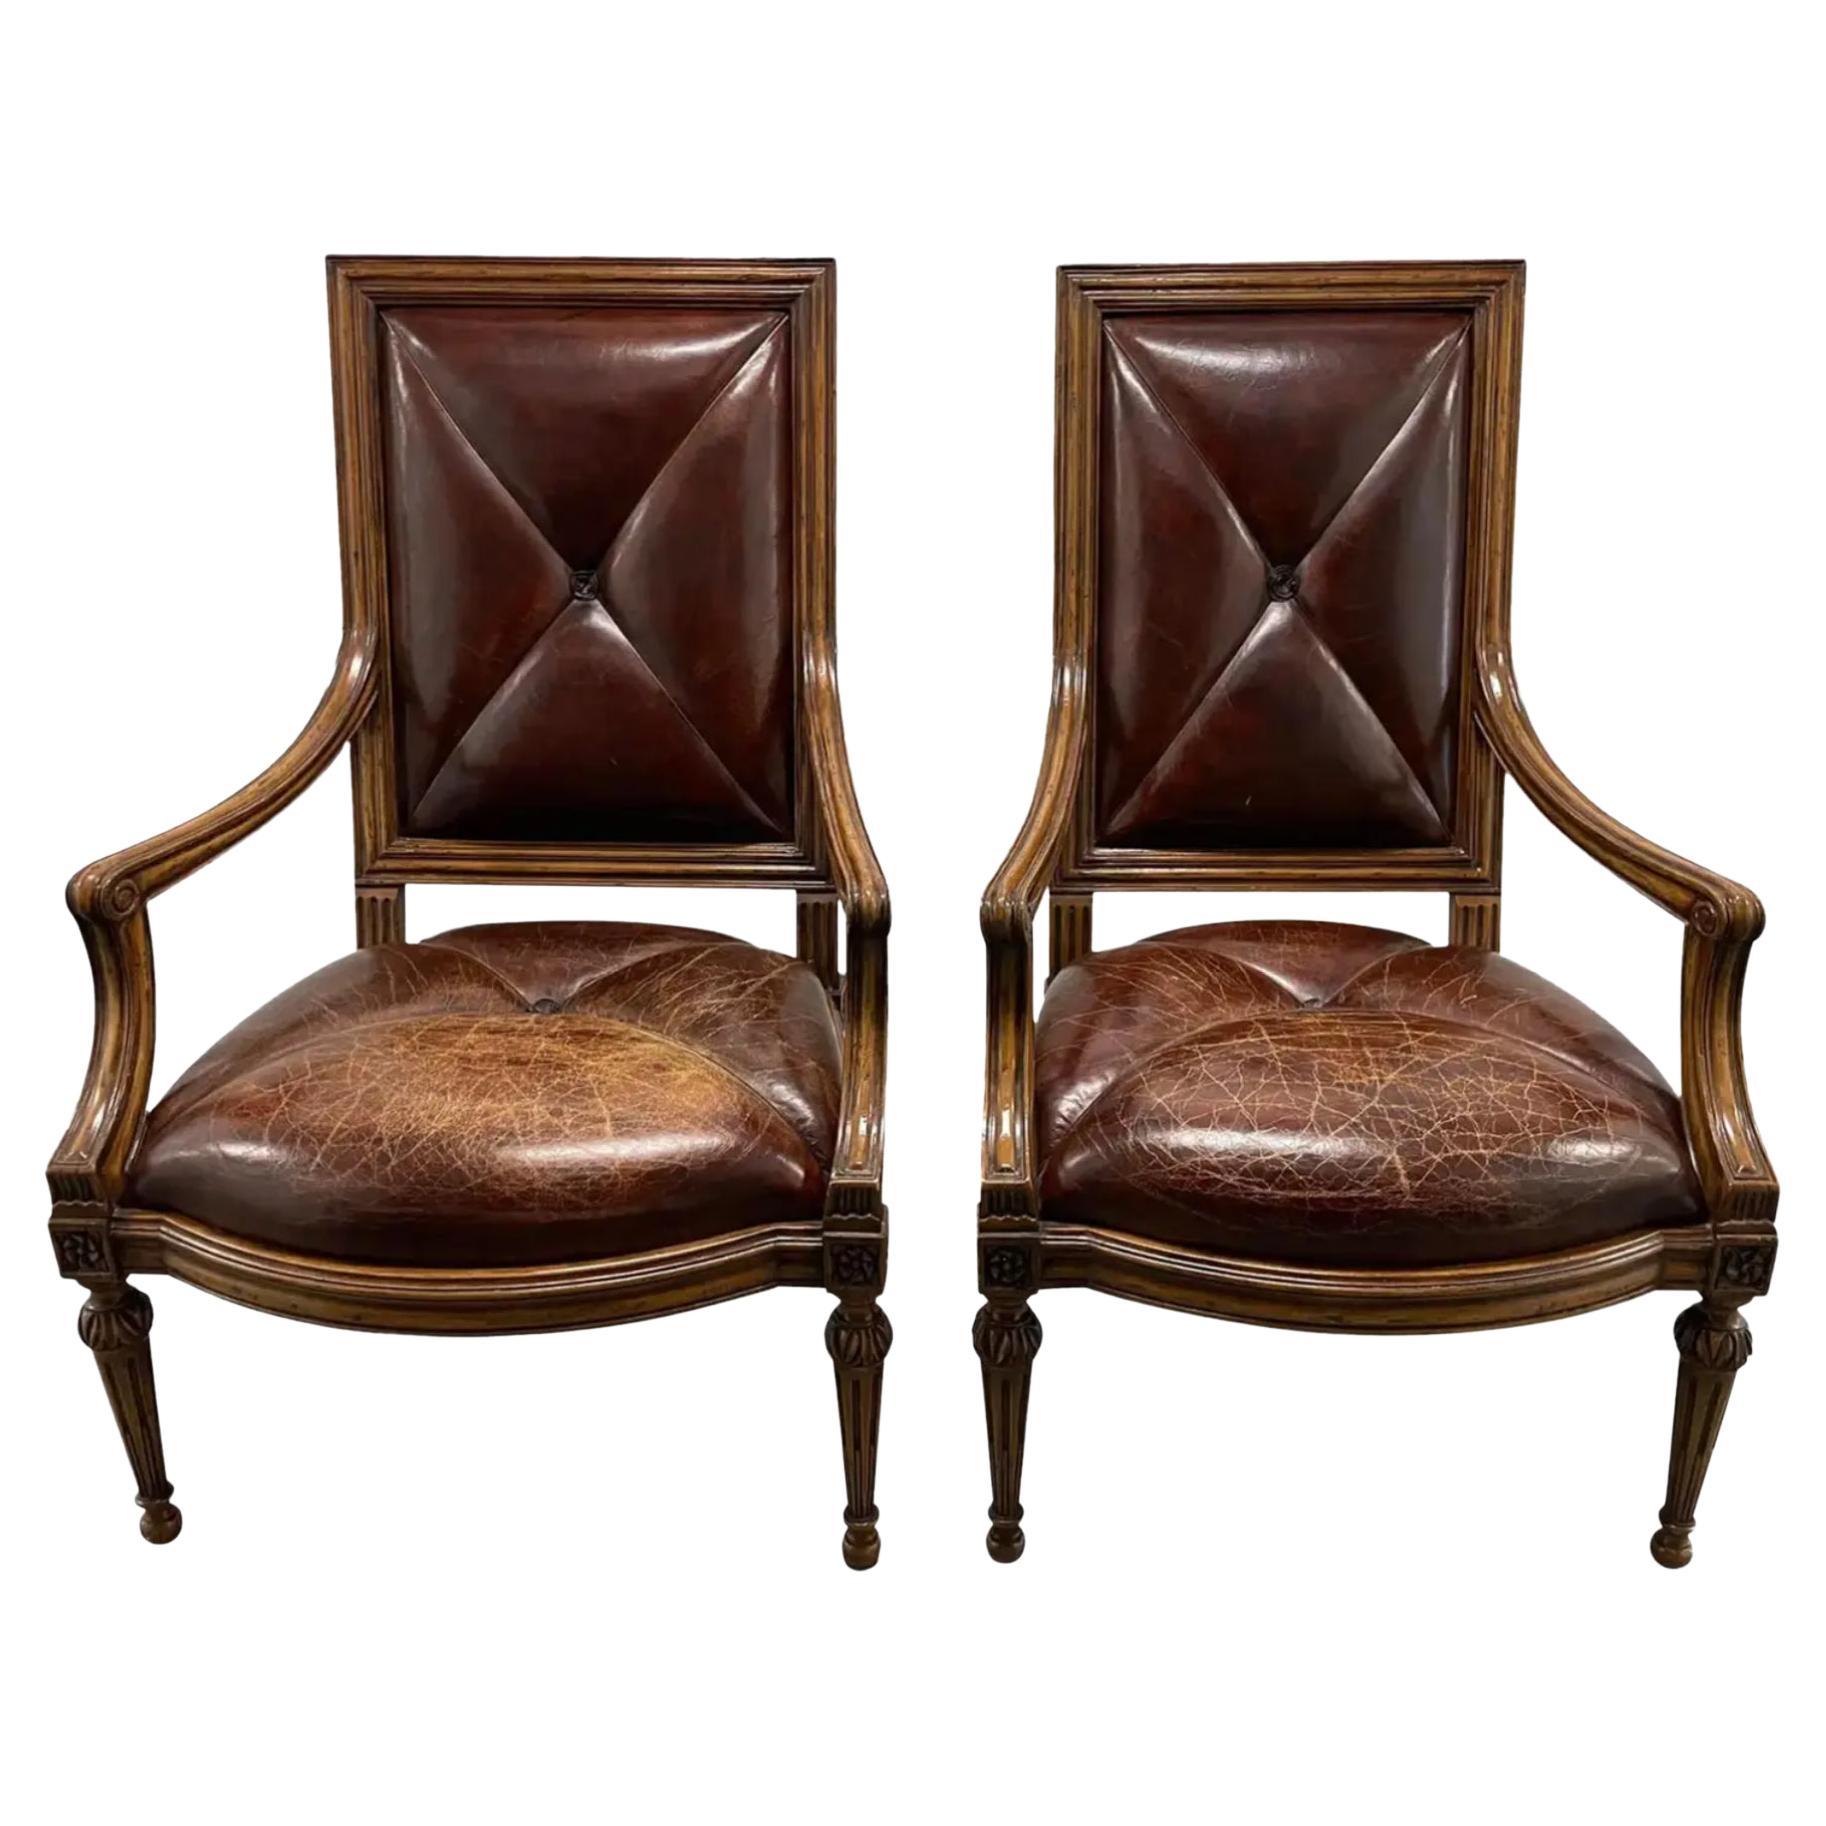 Pair of 18th C Style Hendrix Allardyce Tufted Leather Giltwood Arm Chairs  For Sale